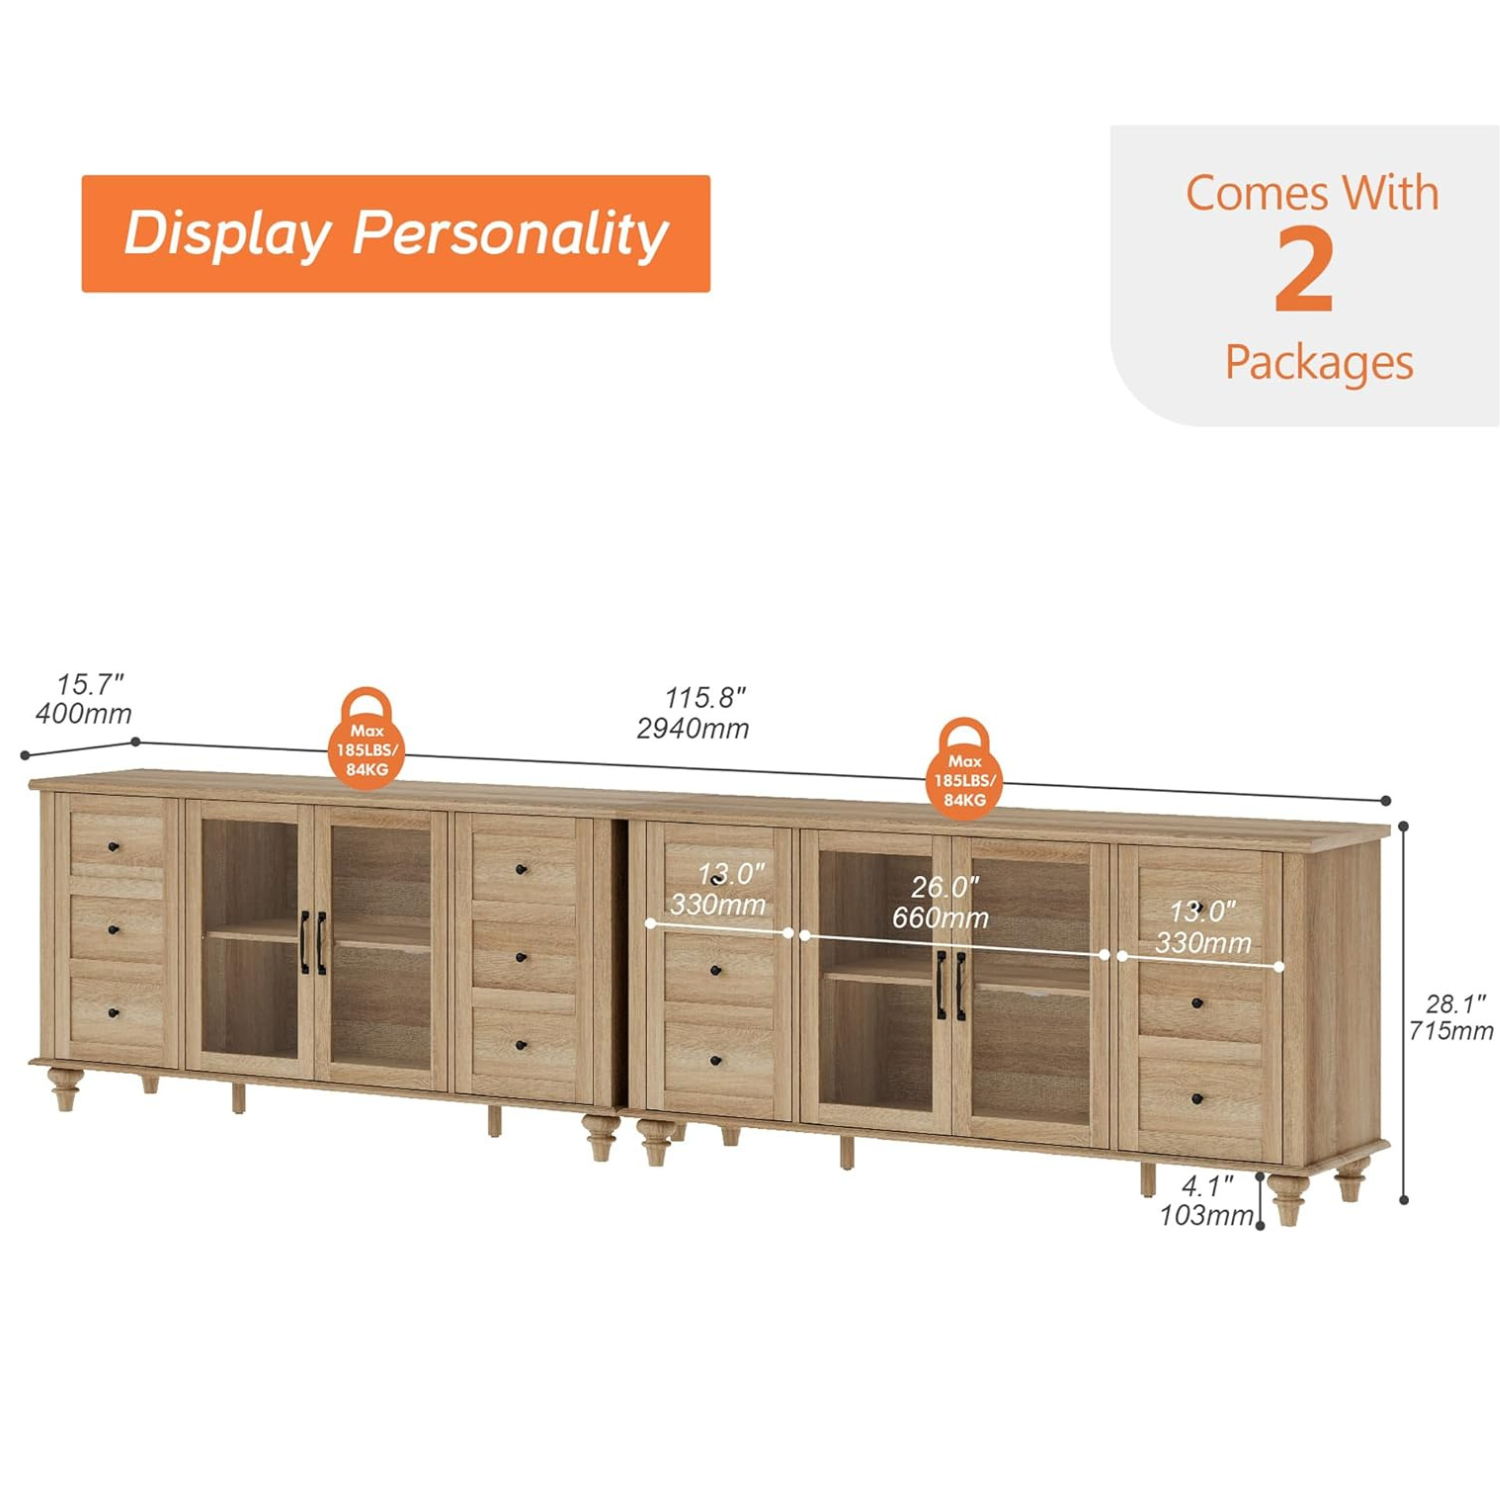 WAMPAT Sideboard Buffet Cabinets with Glass Door, Kitchen Storage Cabinets, Wood Coffee Bar Tables, Living Room, Oak